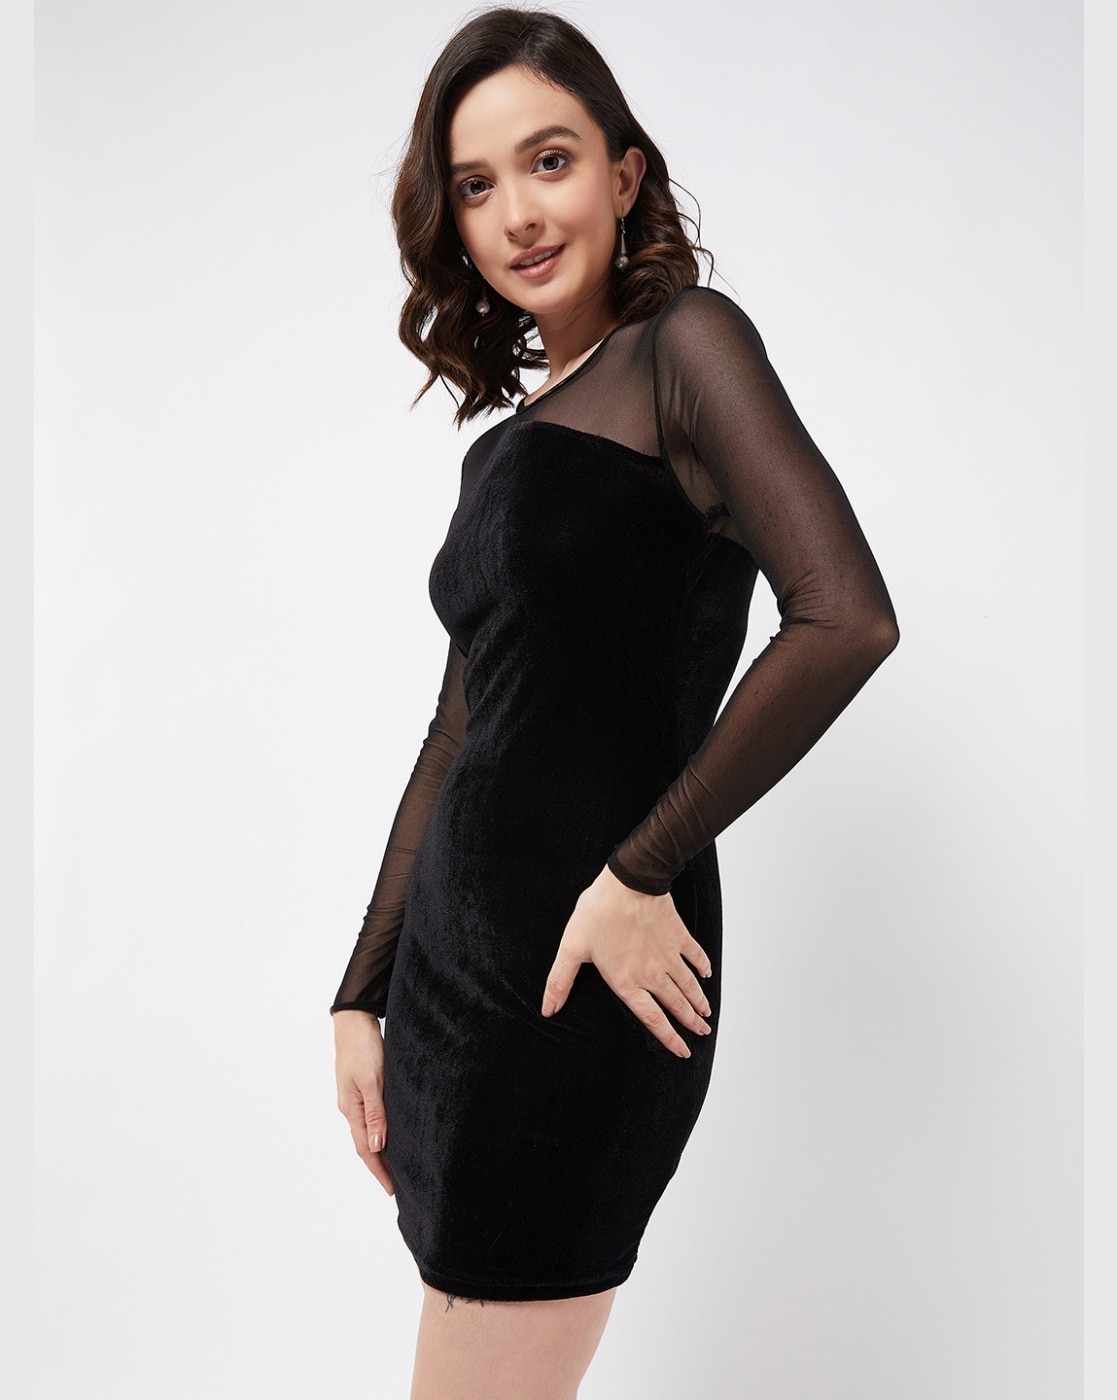 Discover more than 181 black full sleeve bodycon dress latest